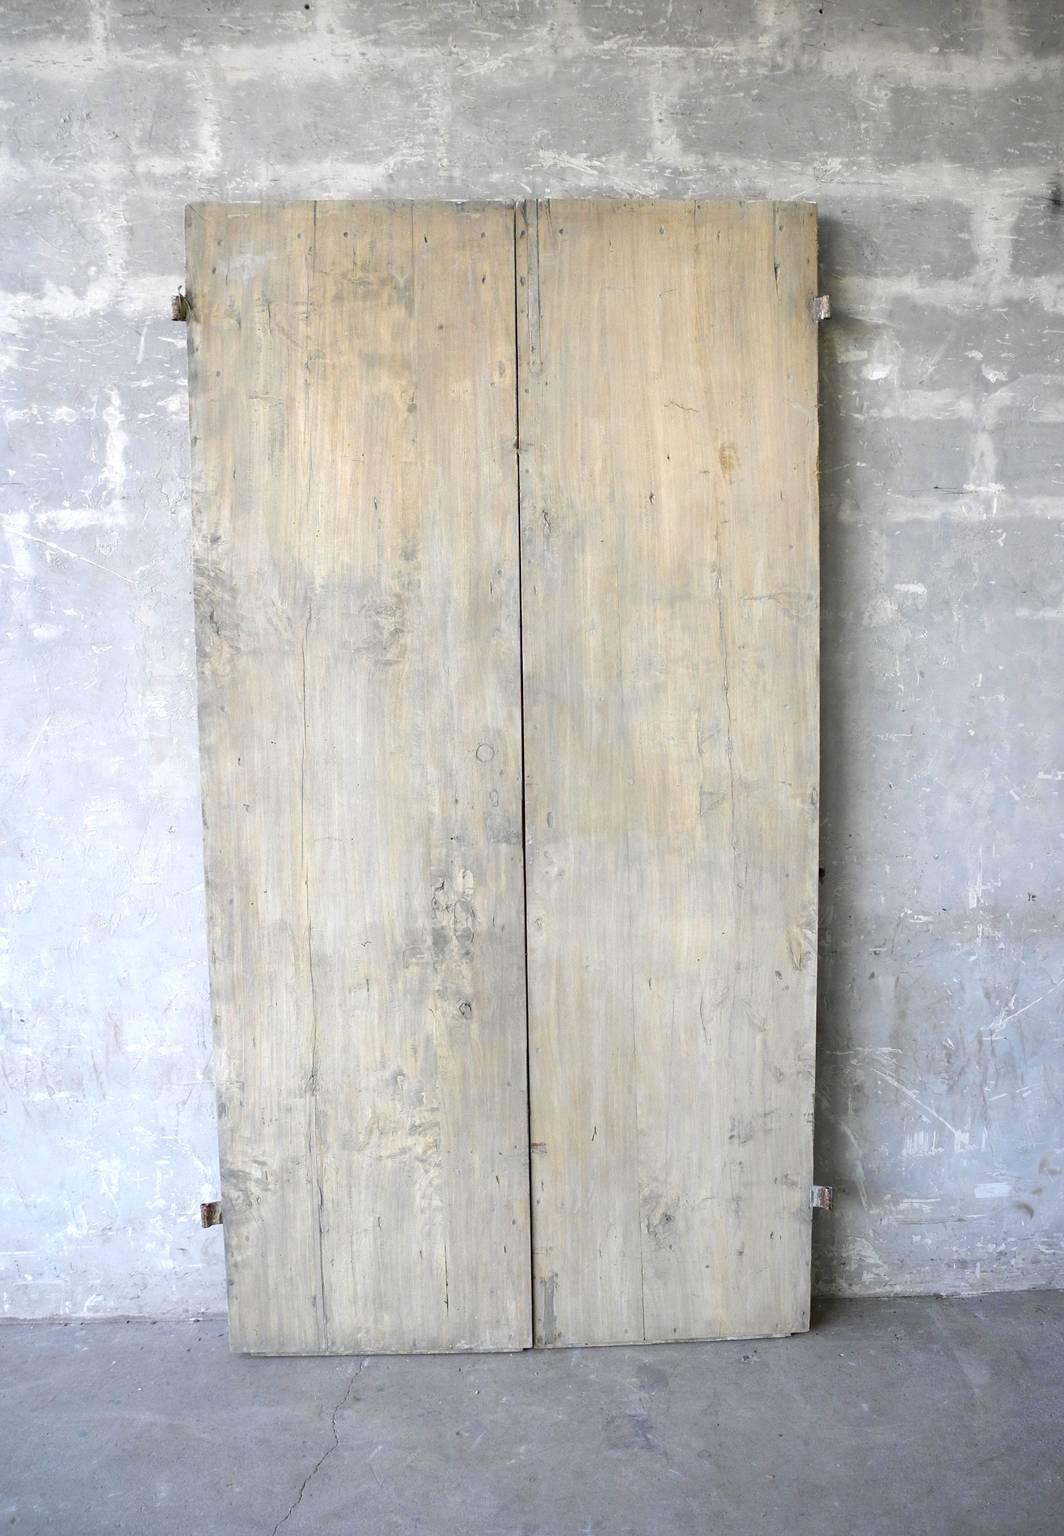 This gorgeous pair of antique 18th century doors from a property in Bologna, Italy have beautiful carving and original antique hardware. The doors have been stripped of color, giving them a natural and lovely finish. The doors are also very sturdy